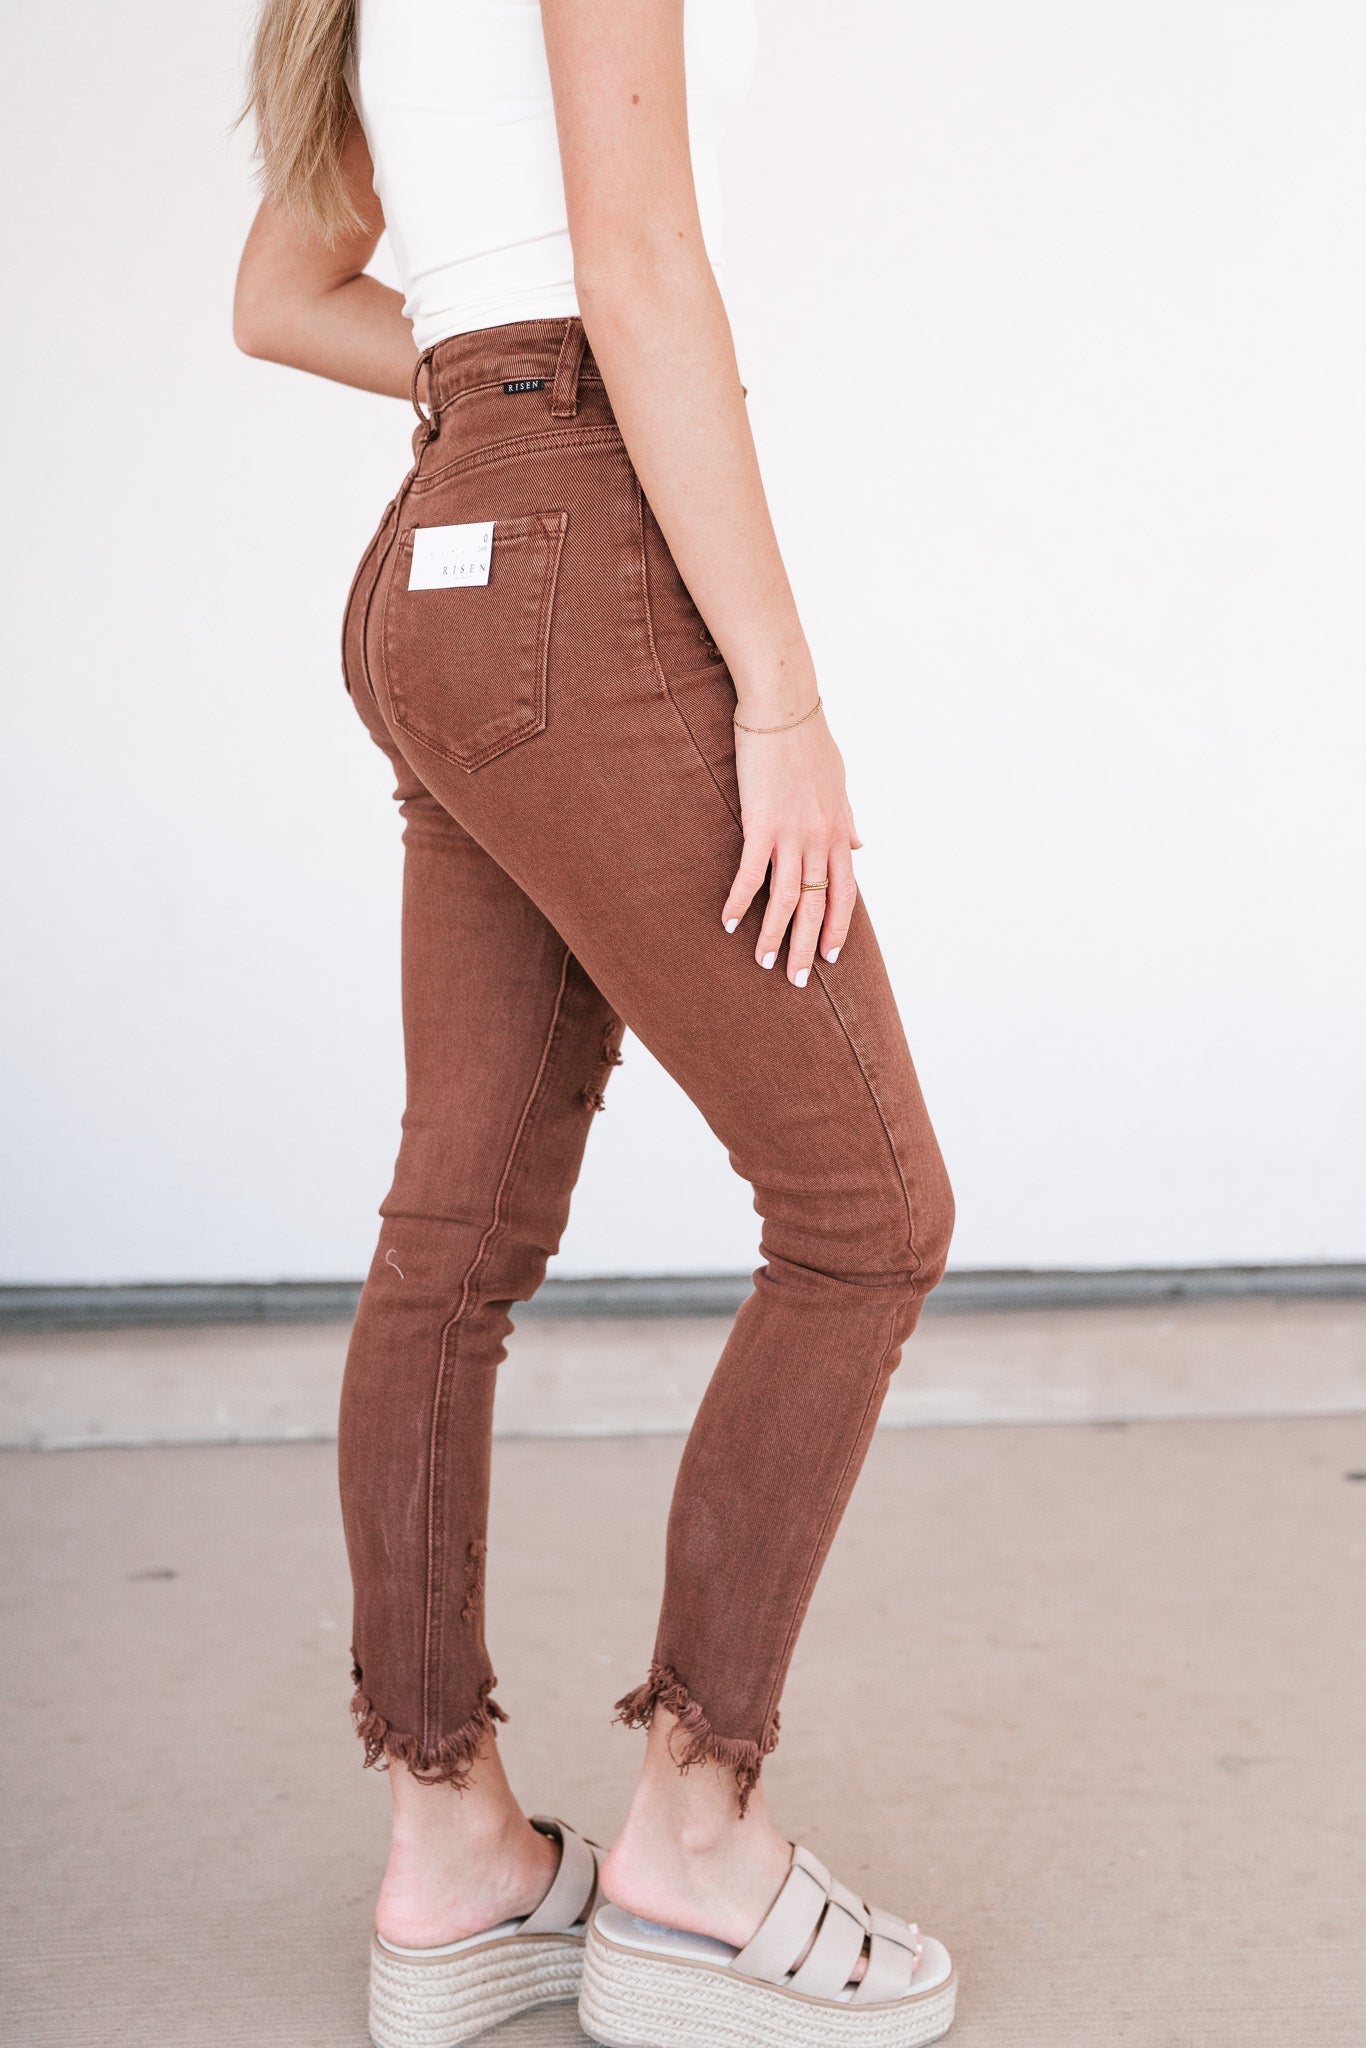 Risen Sienna High Rise Ankle Skinny Jeans